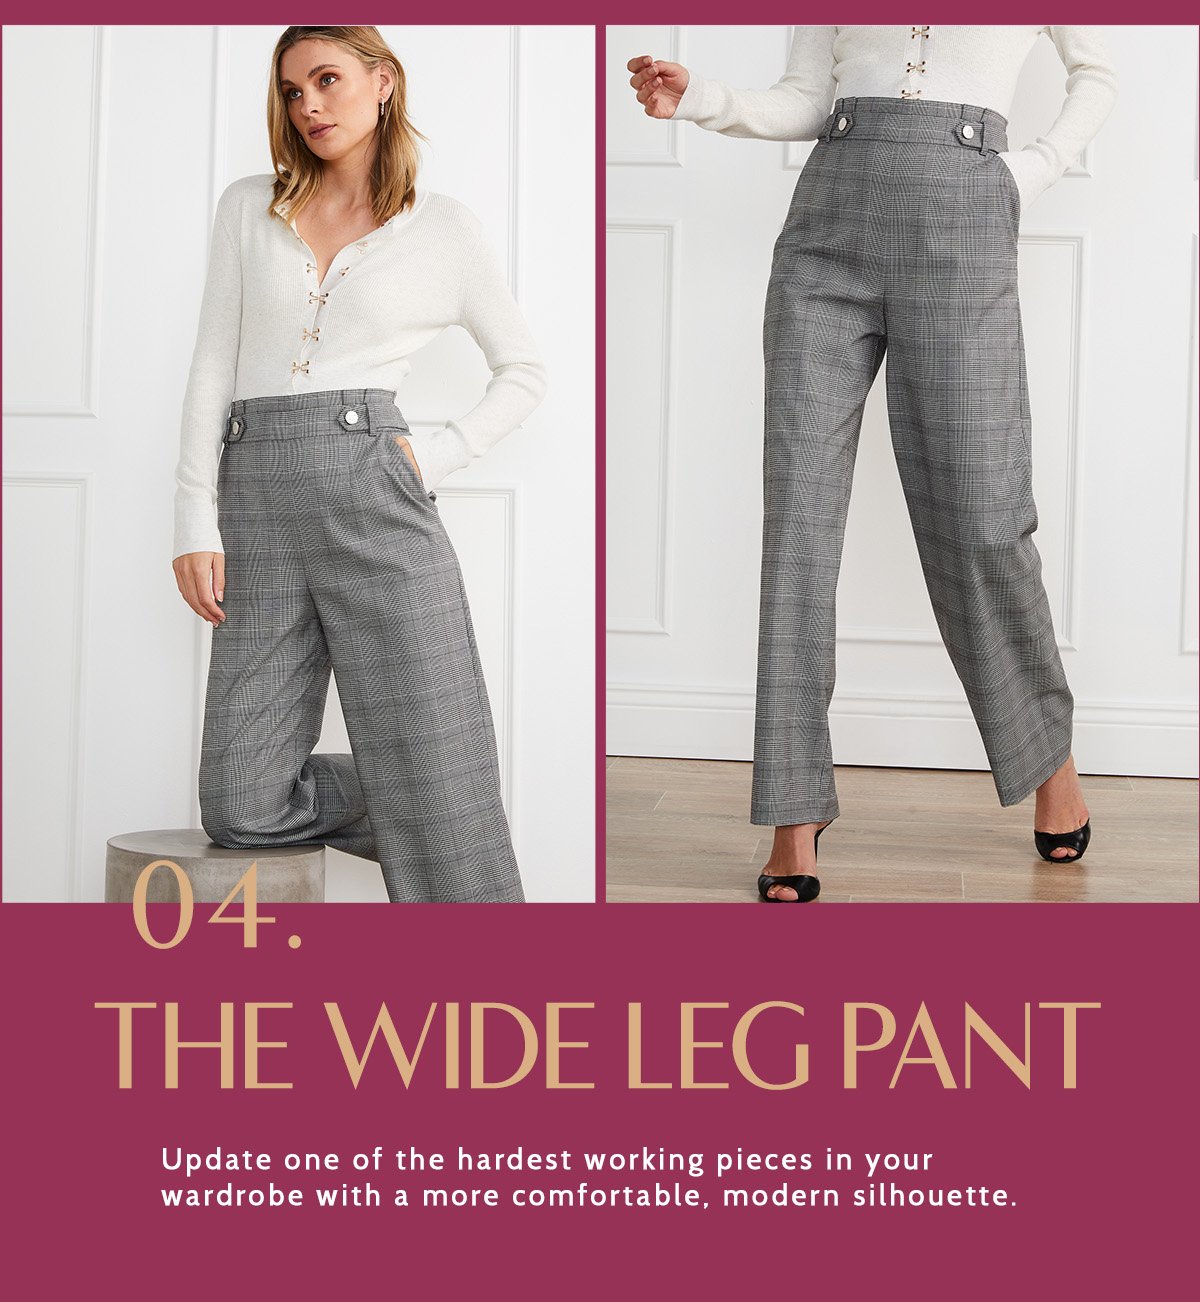 The Wide Leg Pant. Update one of the hardest working pieces in your wardrobe with a more comfortable, modern silhouette. 